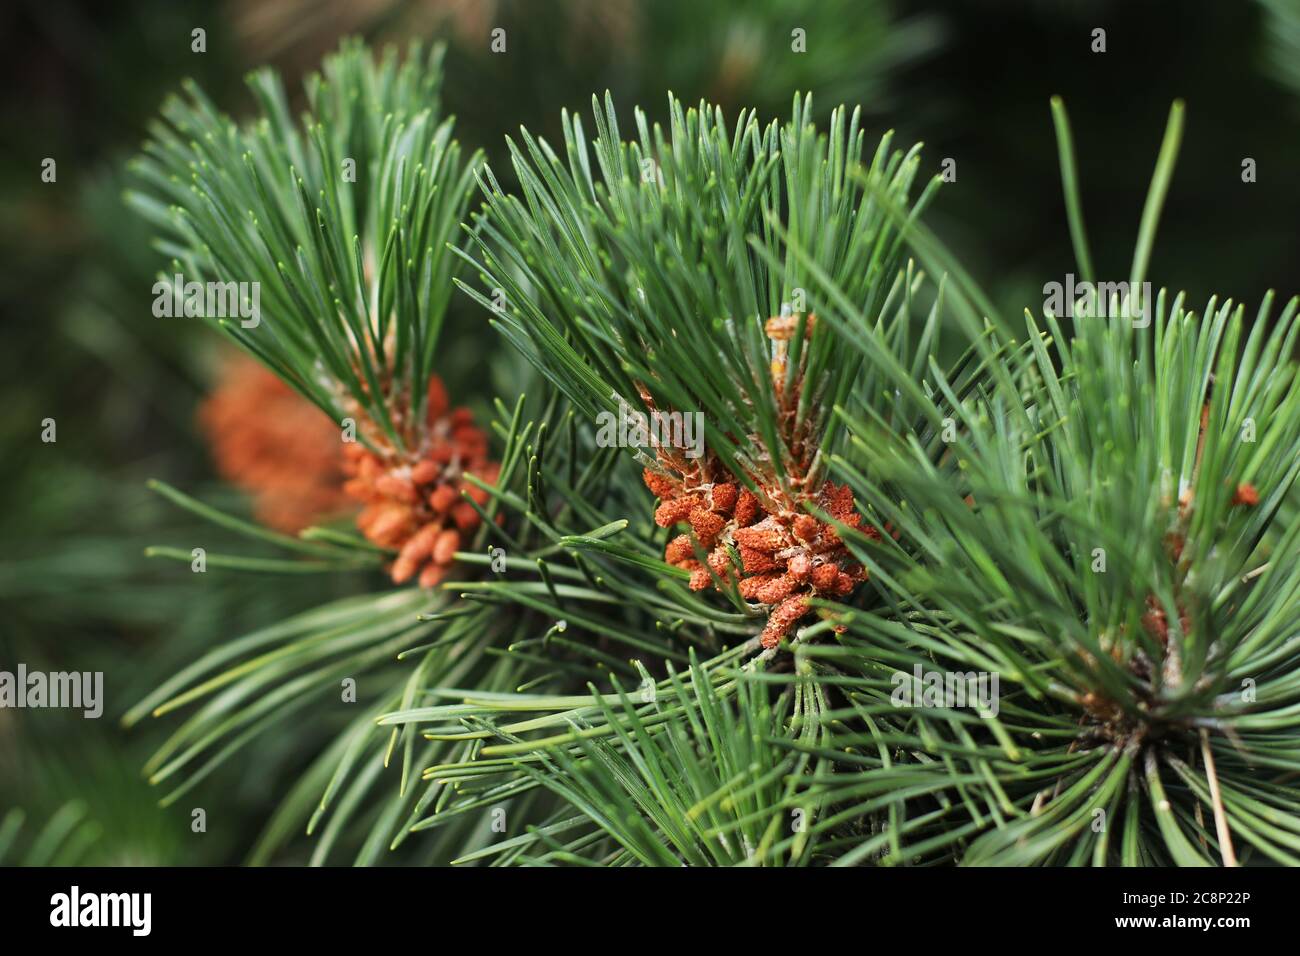 The Young Spruce Cones on the Branch Stock Photo